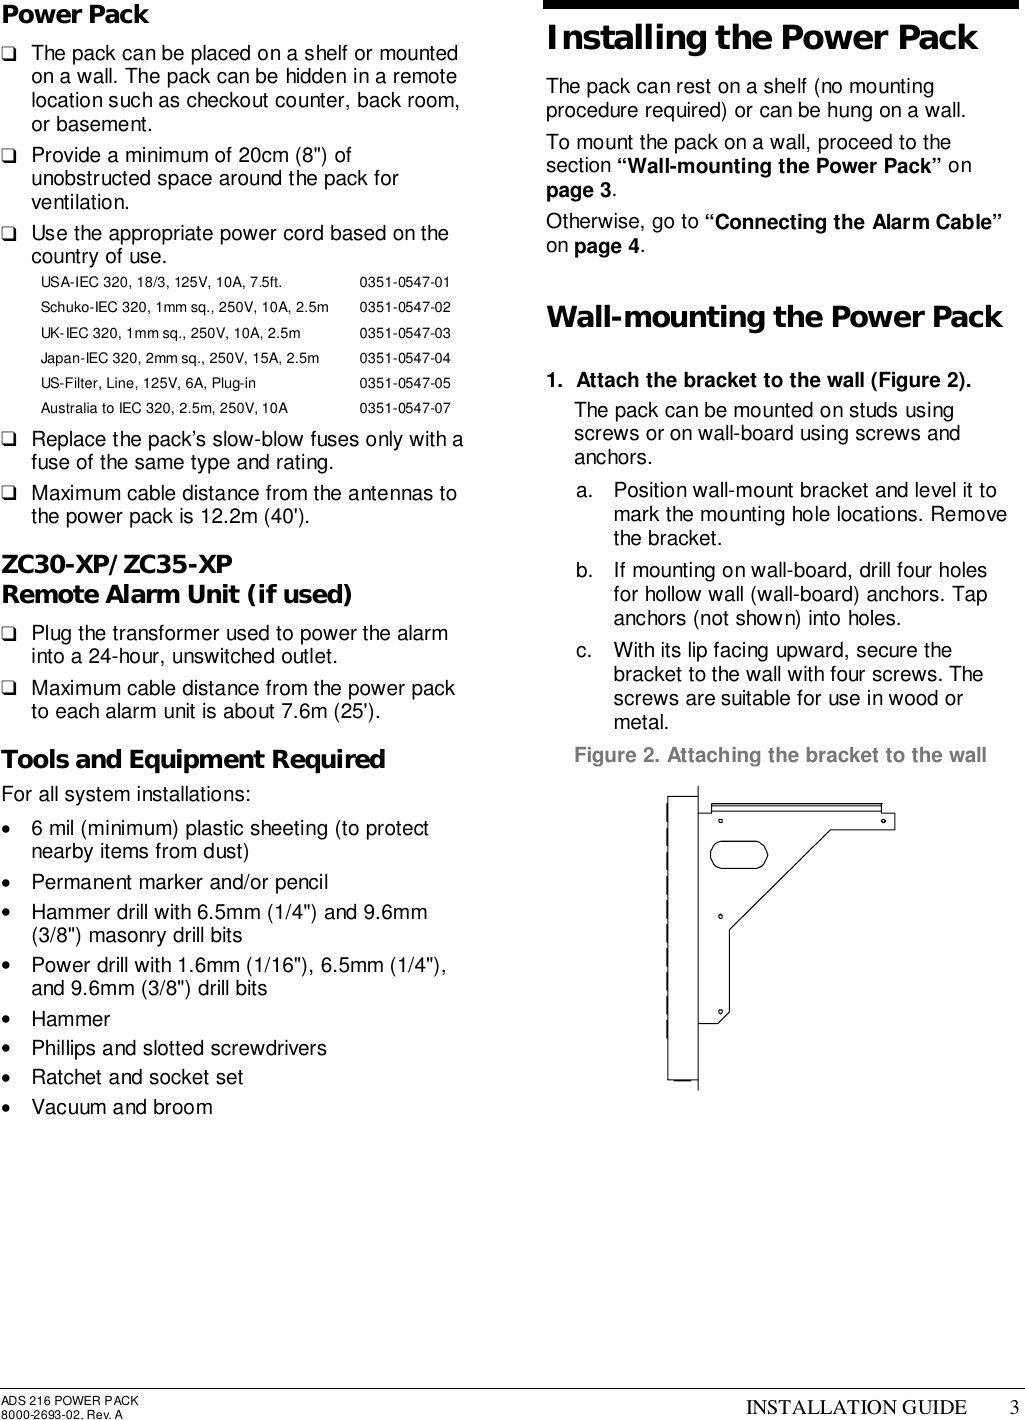 ADS 216 POWER PACK8000-2693-02, Rev. A INSTALLATION GUIDE 3Power Pack❑  The pack can be placed on a shelf or mountedon a wall. The pack can be hidden in a remotelocation such as checkout counter, back room,or basement.❑  Provide a minimum of 20cm (8&quot;) ofunobstructed space around the pack forventilation.❑  Use the appropriate power cord based on thecountry of use.USA-IEC 320, 18/3, 125V, 10A, 7.5ft. 0351-0547-01Schuko-IEC 320, 1mm sq., 250V, 10A, 2.5m 0351-0547-02UK-IEC 320, 1mm sq., 250V, 10A, 2.5m 0351-0547-03Japan-IEC 320, 2mm sq., 250V, 15A, 2.5m 0351-0547-04US-Filter, Line, 125V, 6A, Plug-in 0351-0547-05Australia to IEC 320, 2.5m, 250V, 10A 0351-0547-07❑  Replace the pack’s slow-blow fuses only with afuse of the same type and rating.❑  Maximum cable distance from the antennas tothe power pack is 12.2m (40&apos;).ZC30-XP/ZC35-XPRemote Alarm Unit (if used)❑  Plug the transformer used to power the alarminto a 24-hour, unswitched outlet.❑  Maximum cable distance from the power packto each alarm unit is about 7.6m (25&apos;).Tools and Equipment RequiredFor all system installations:•  6 mil (minimum) plastic sheeting (to protectnearby items from dust)•  Permanent marker and/or pencil•  Hammer drill with 6.5mm (1/4&quot;) and 9.6mm(3/8&quot;) masonry drill bits•  Power drill with 1.6mm (1/16&quot;), 6.5mm (1/4&quot;),and 9.6mm (3/8&quot;) drill bits• Hammer•  Phillips and slotted screwdrivers•  Ratchet and socket set•  Vacuum and broomInstalling the Power PackThe pack can rest on a shelf (no mountingprocedure required) or can be hung on a wall.To mount the pack on a wall, proceed to thesection “Wall-mounting the Power Pack” onpage 3.Otherwise, go to “Connecting the Alarm Cable”on page 4.Wall-mounting the Power Pack1.  Attach the bracket to the wall (Figure 2).  The pack can be mounted on studs usingscrews or on wall-board using screws andanchors.a.  Position wall-mount bracket and level it tomark the mounting hole locations. Removethe bracket.b.  If mounting on wall-board, drill four holesfor hollow wall (wall-board) anchors. Tapanchors (not shown) into holes.c.  With its lip facing upward, secure thebracket to the wall with four screws. Thescrews are suitable for use in wood ormetal.Figure 2. Attaching the bracket to the wall